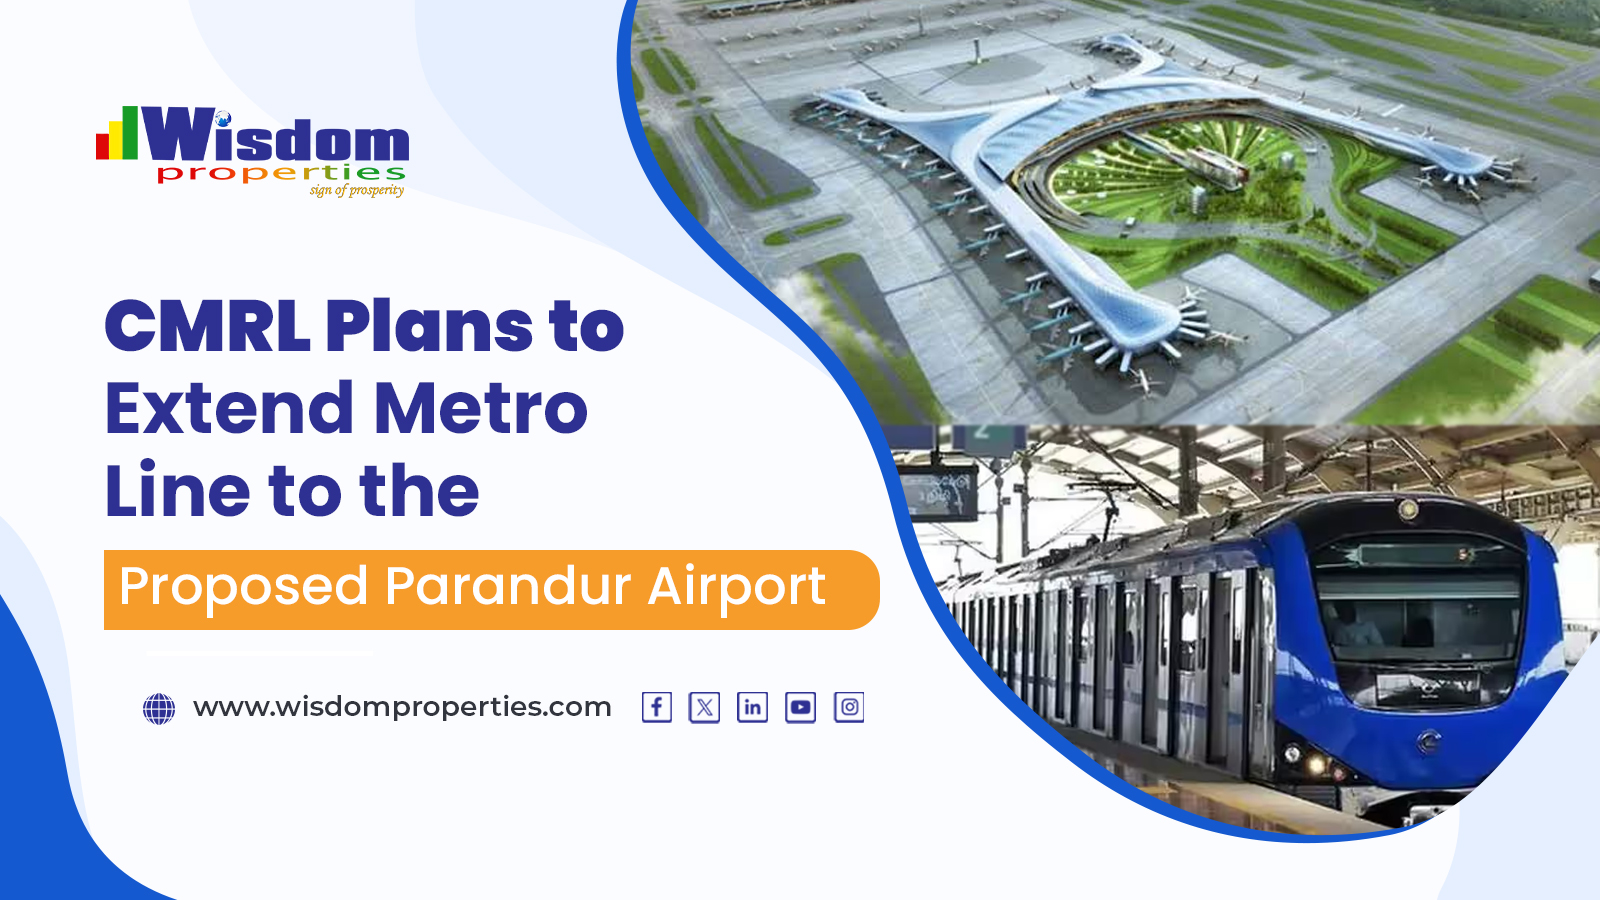 CMRL Plans to extend metro line to the Proposed Parandur Airport